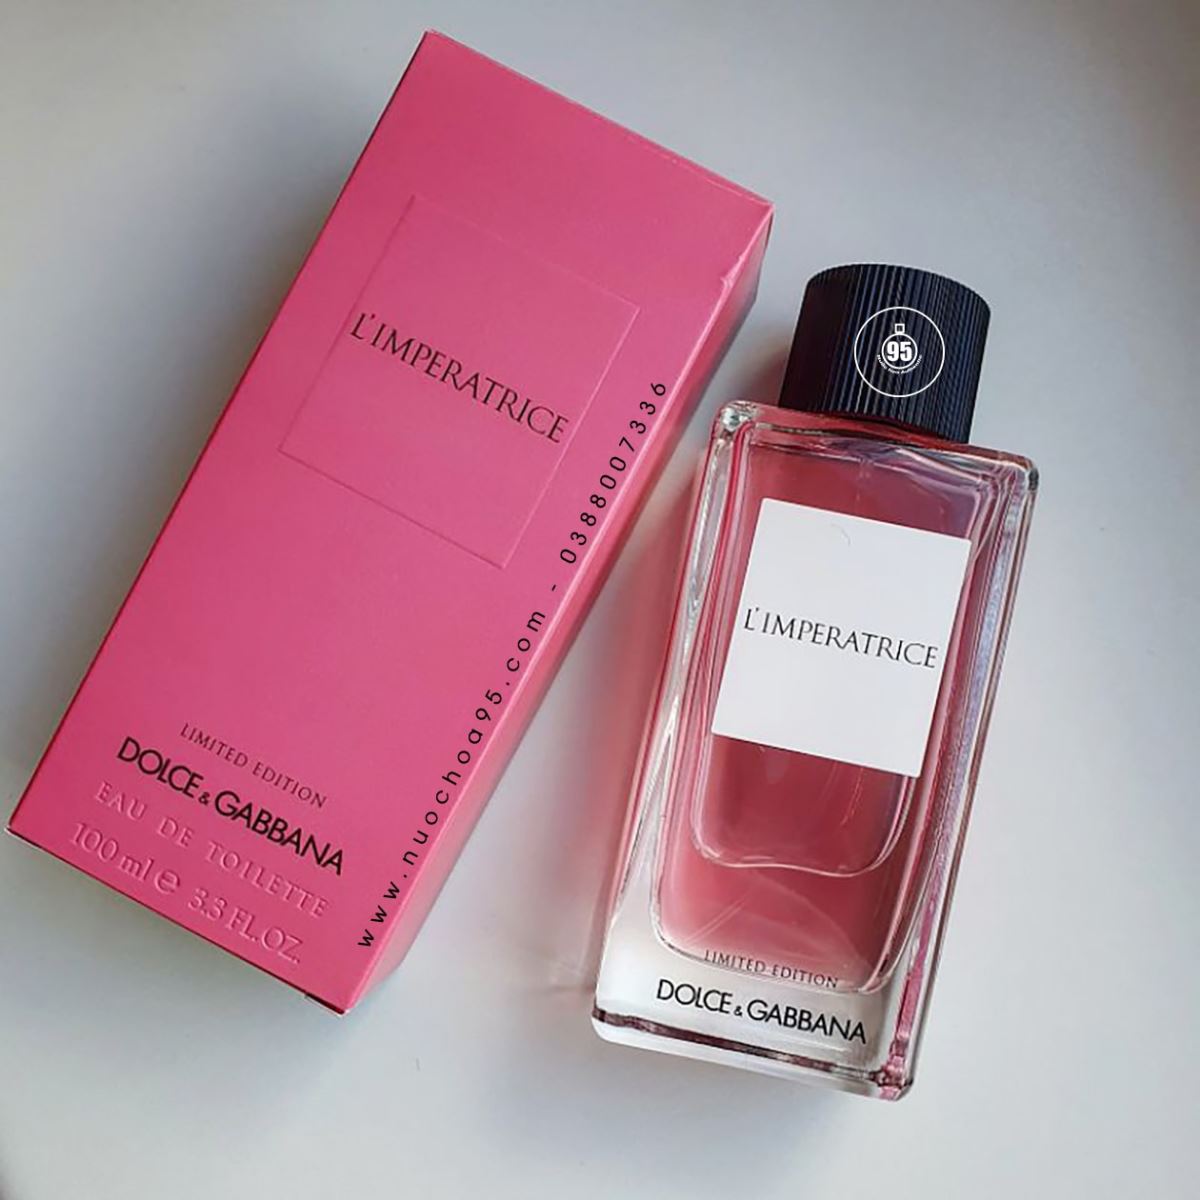 Nước hoa Dolce & Gabbana L'Imperatrice Limited Edition